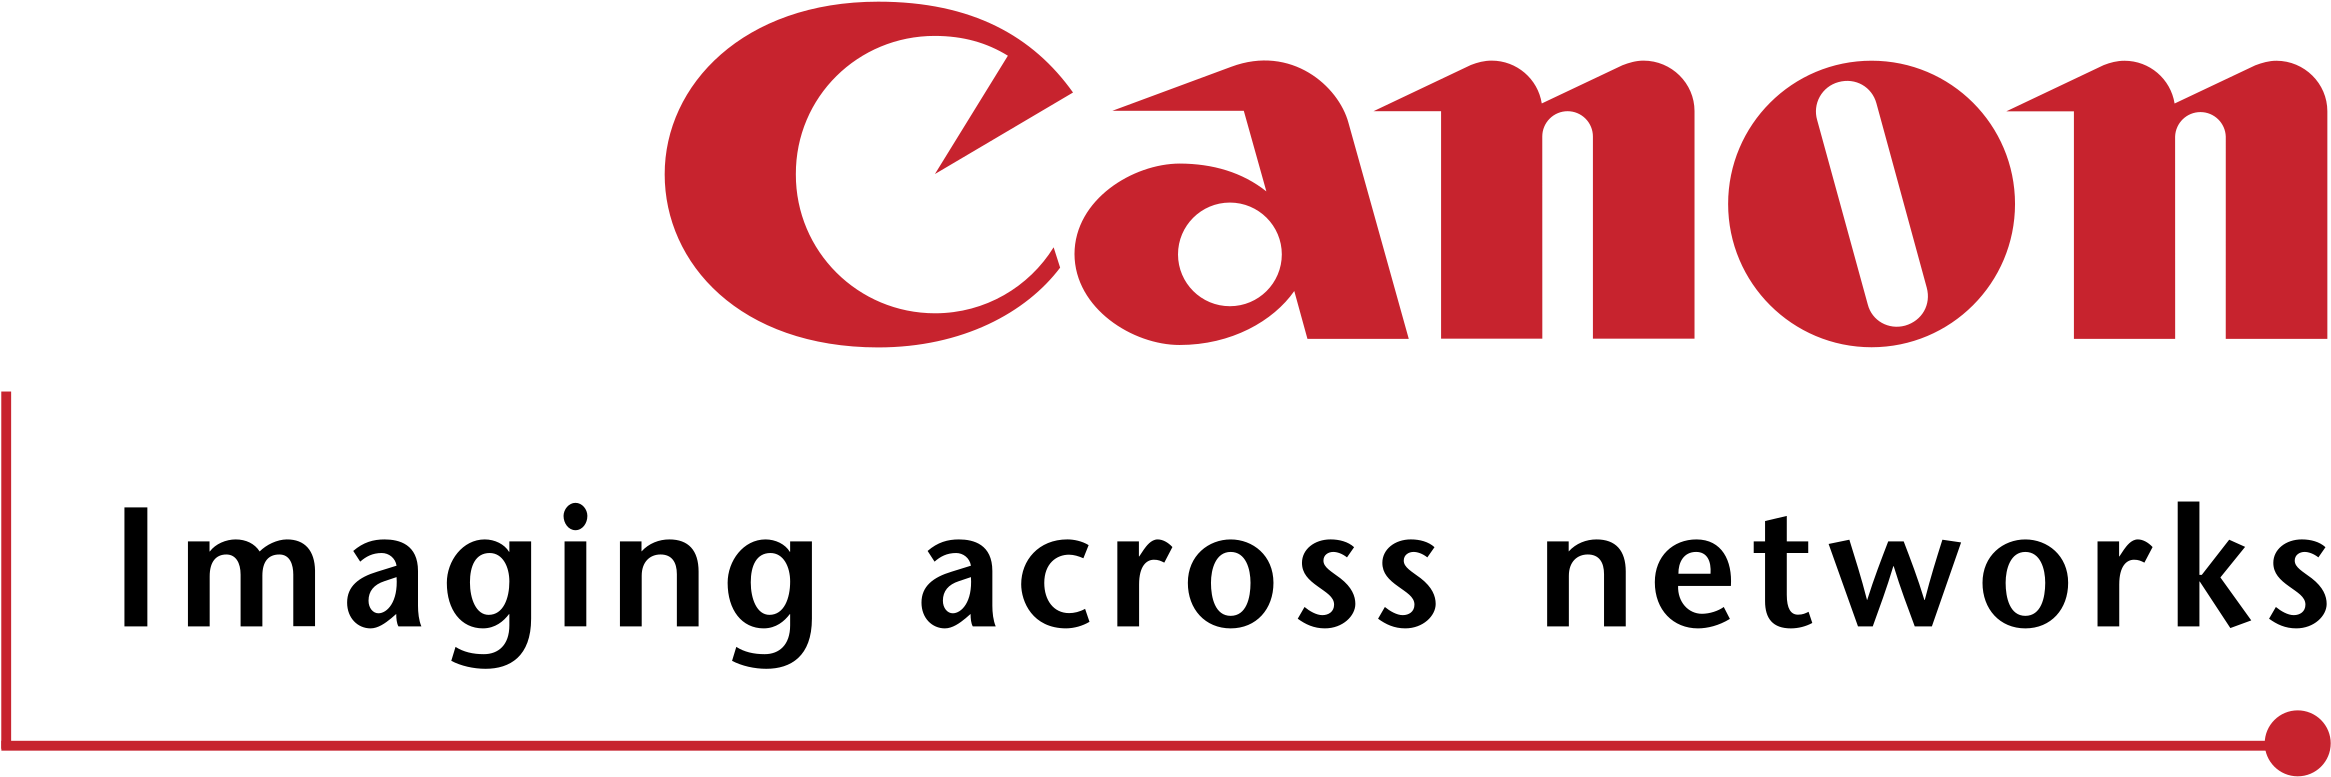 Canon Logowith Slogan PNG image